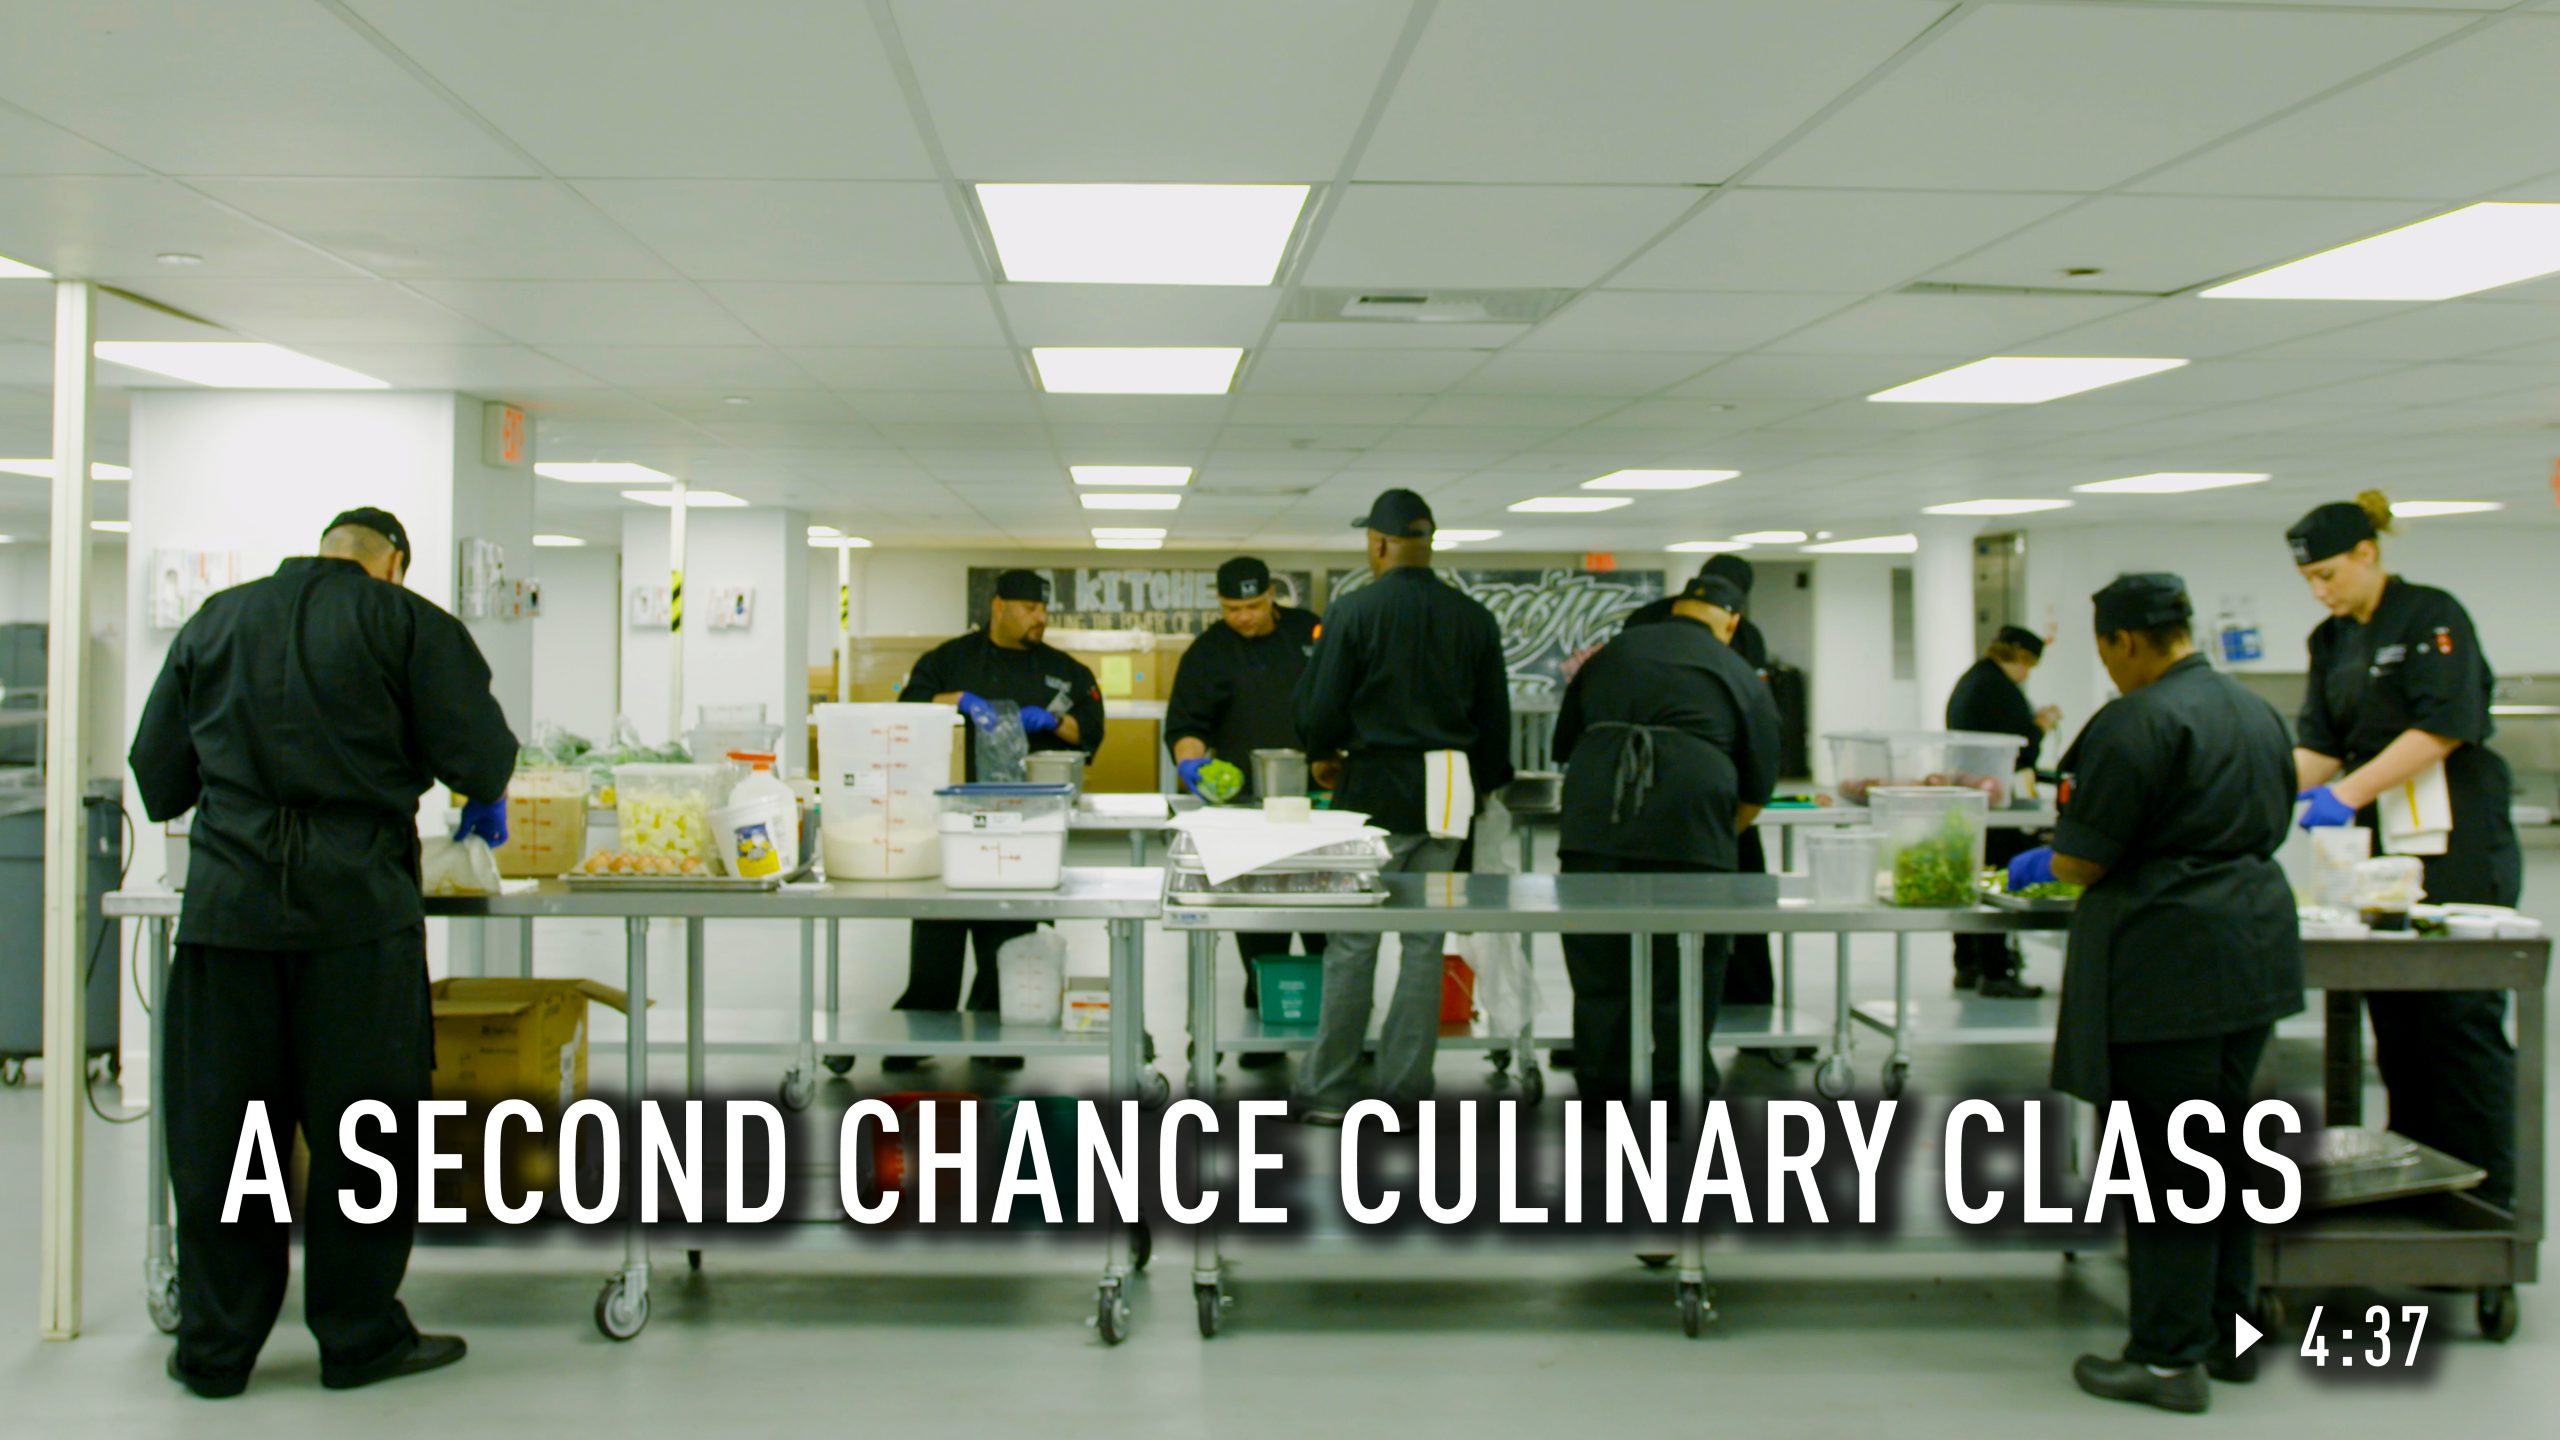 A Second Chance Culinary Class